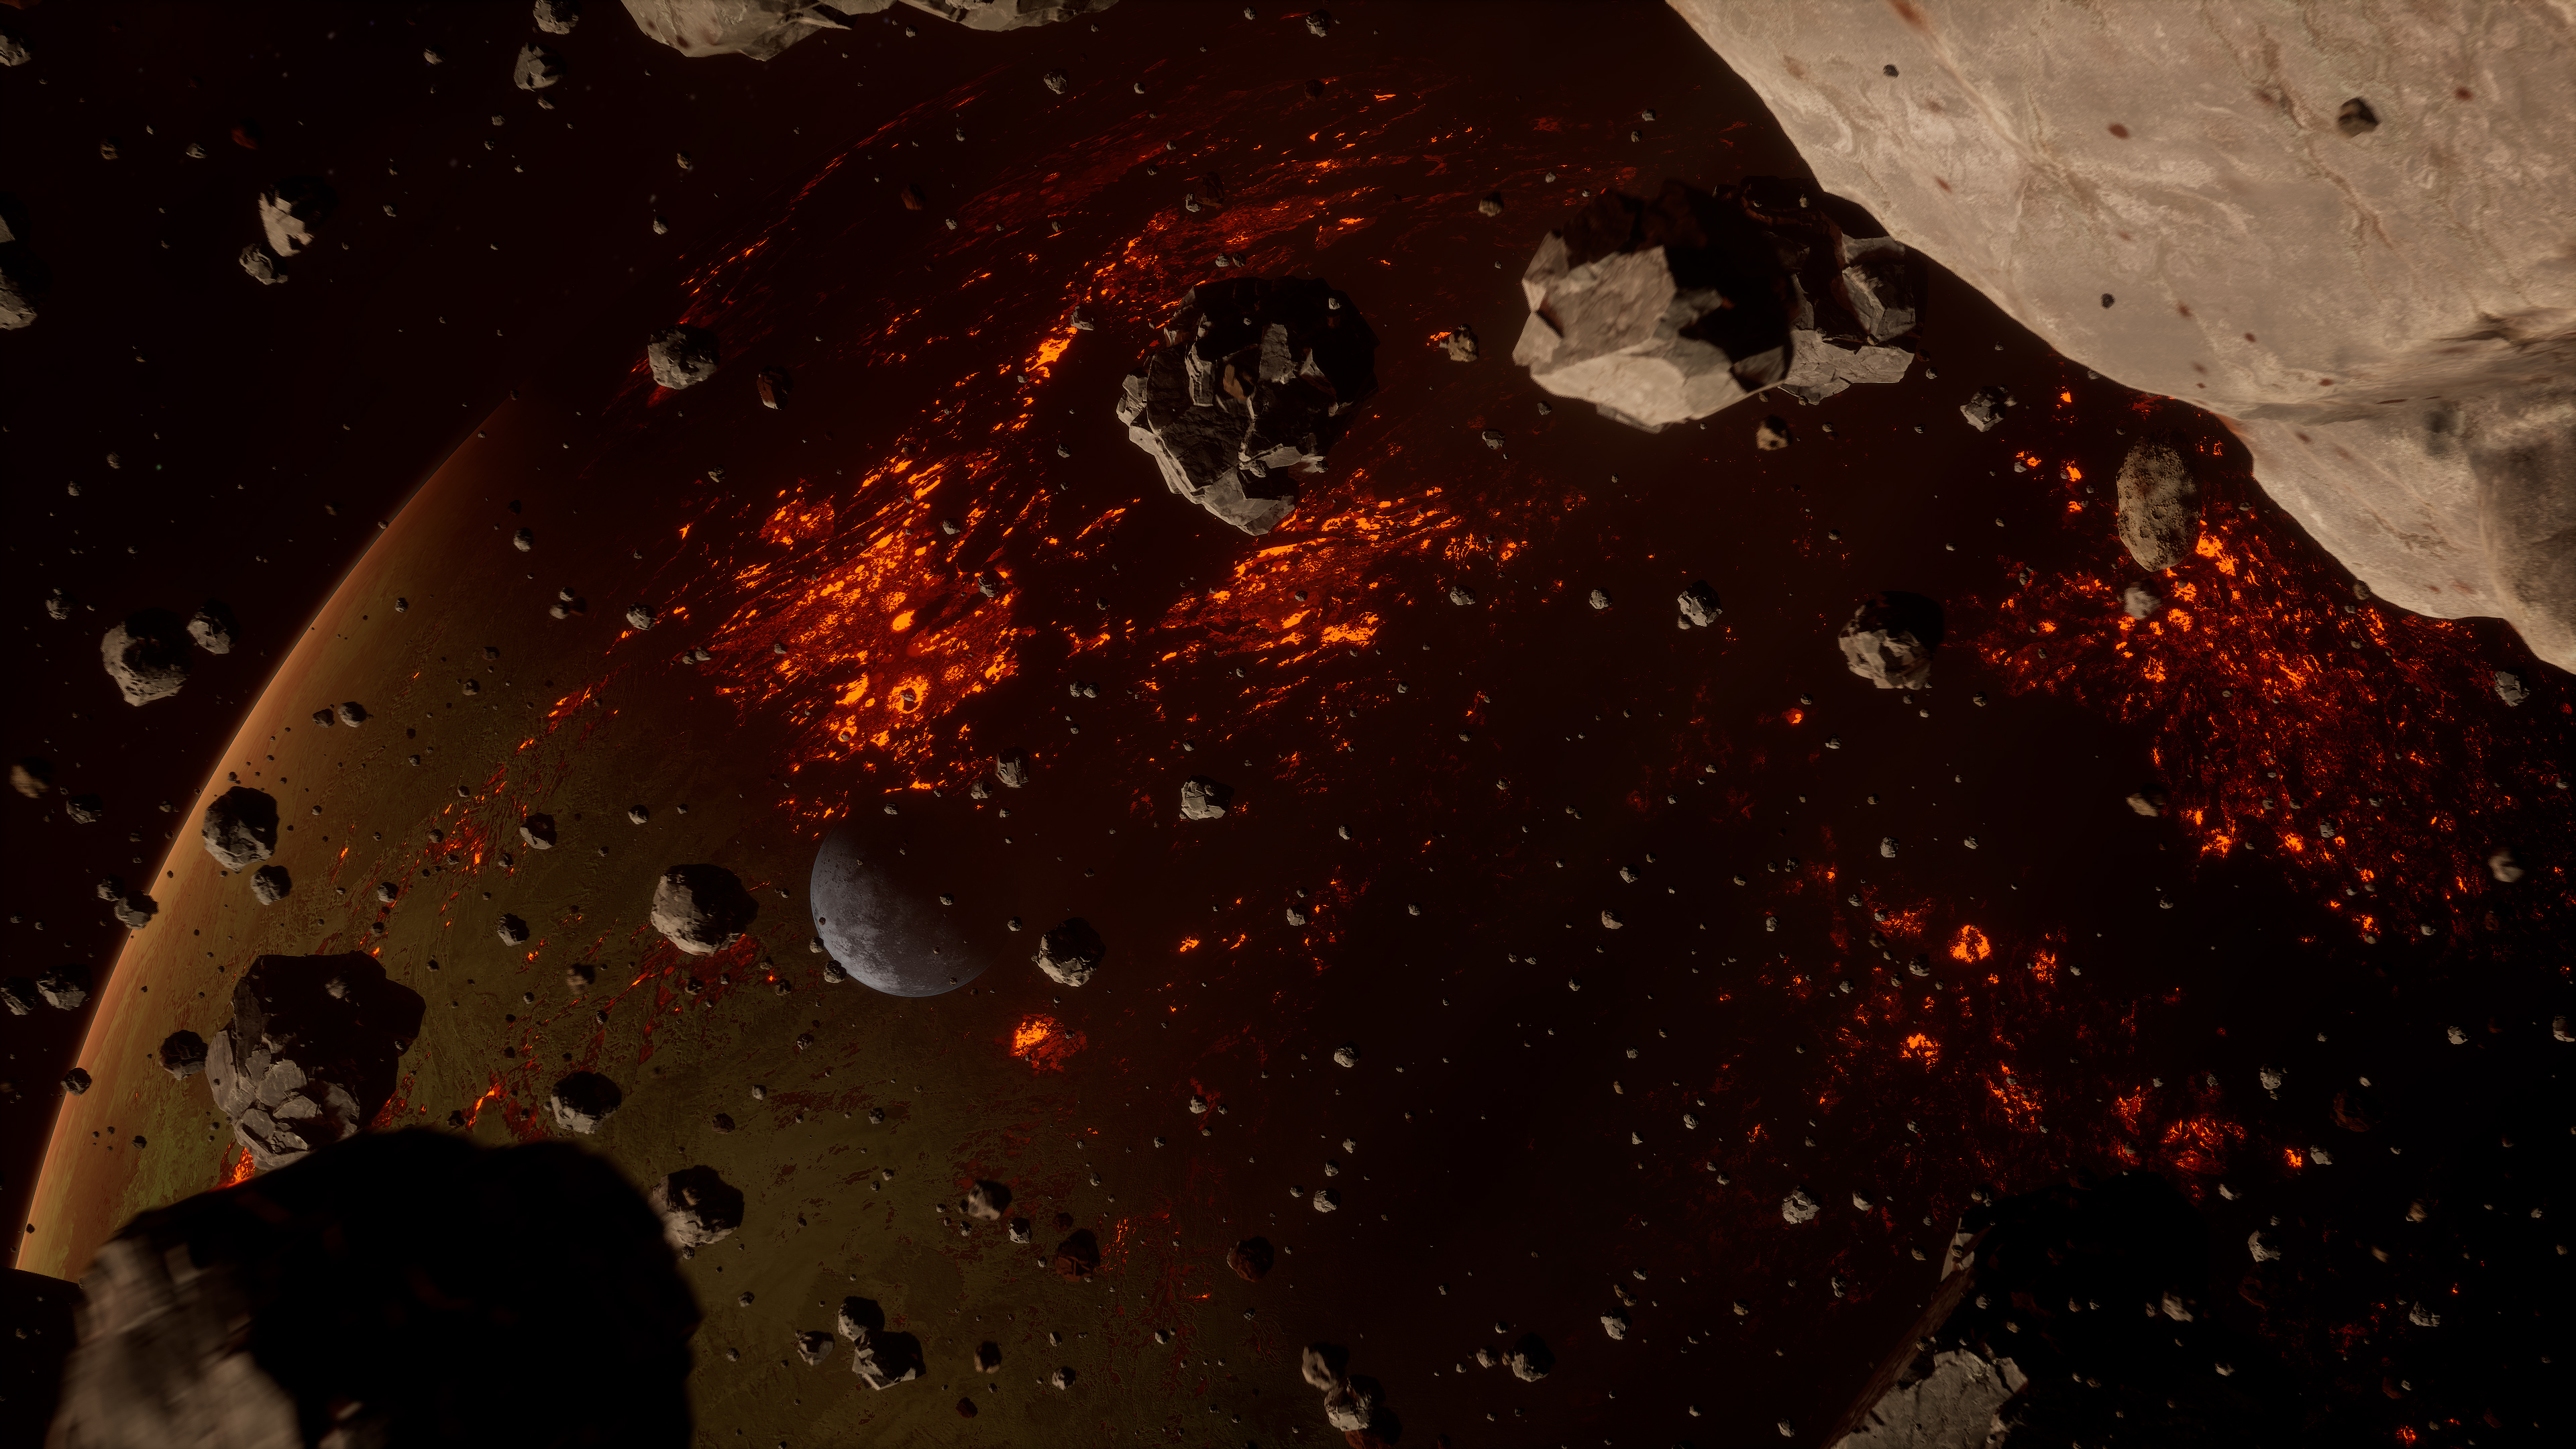 Flying through an asteroid field around a diamond planet.